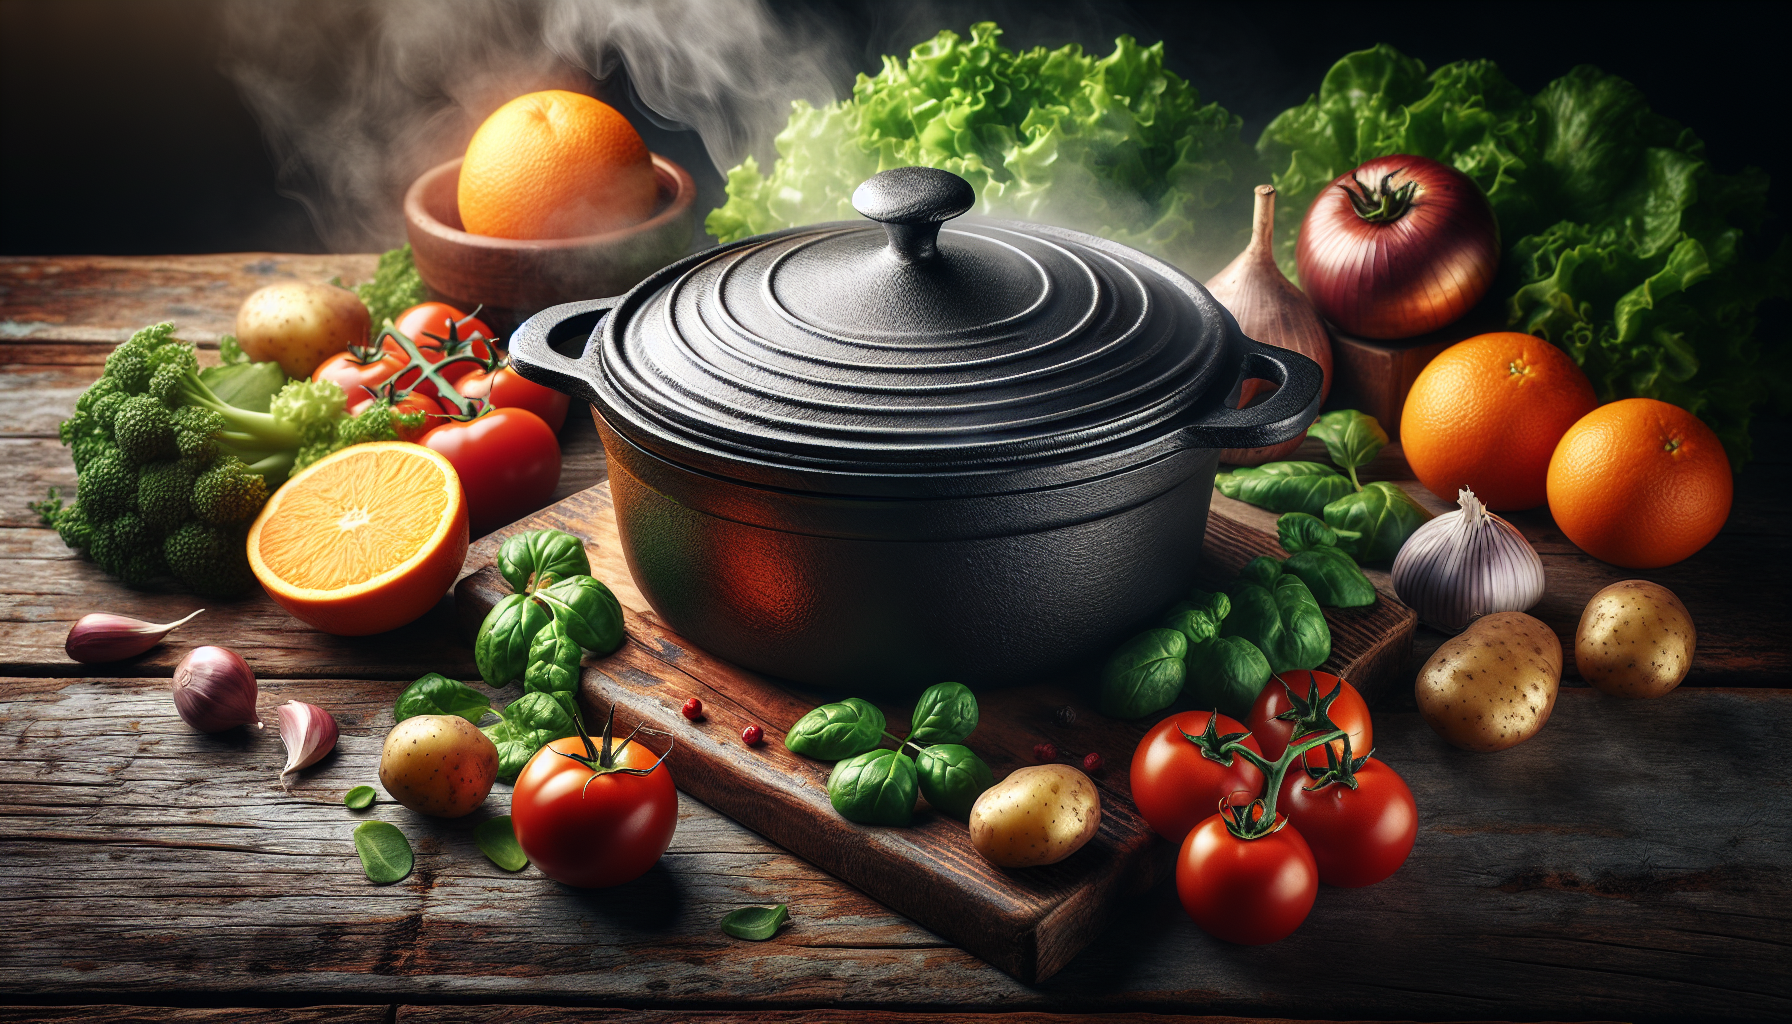 The Art Of Dutch Oven Cooking: Hearty And Tasty